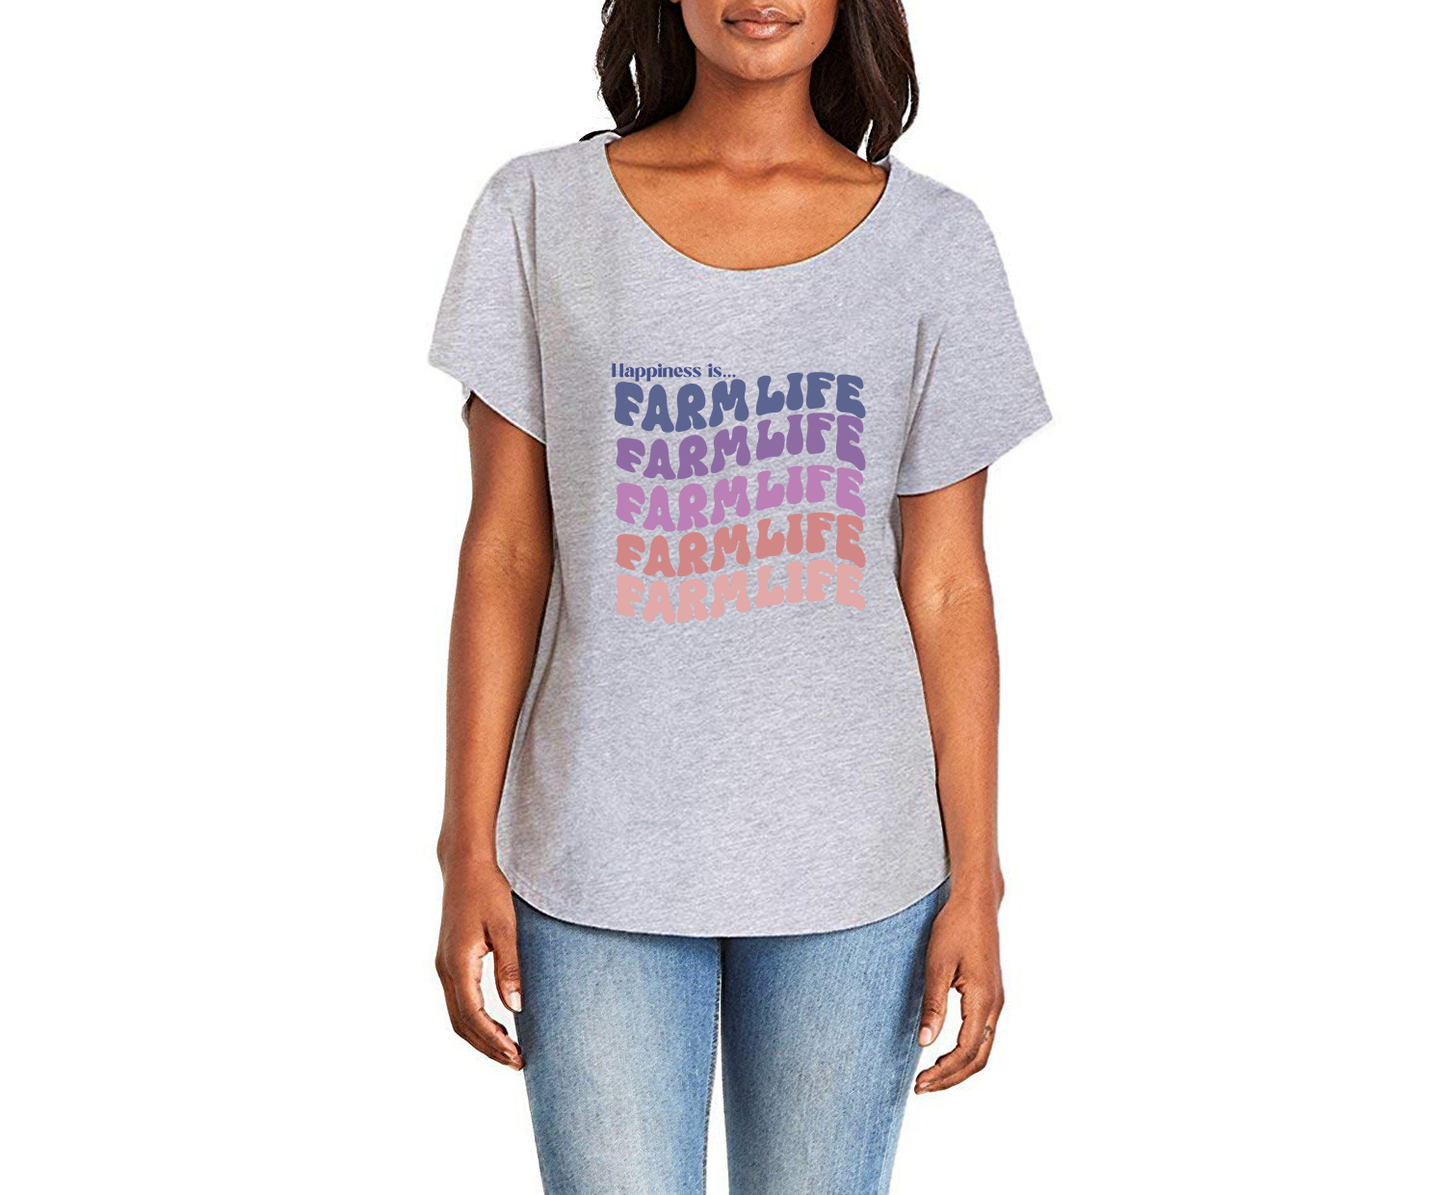 Happiness is Farm Life Ladies Tee Shirt - In White & Grey